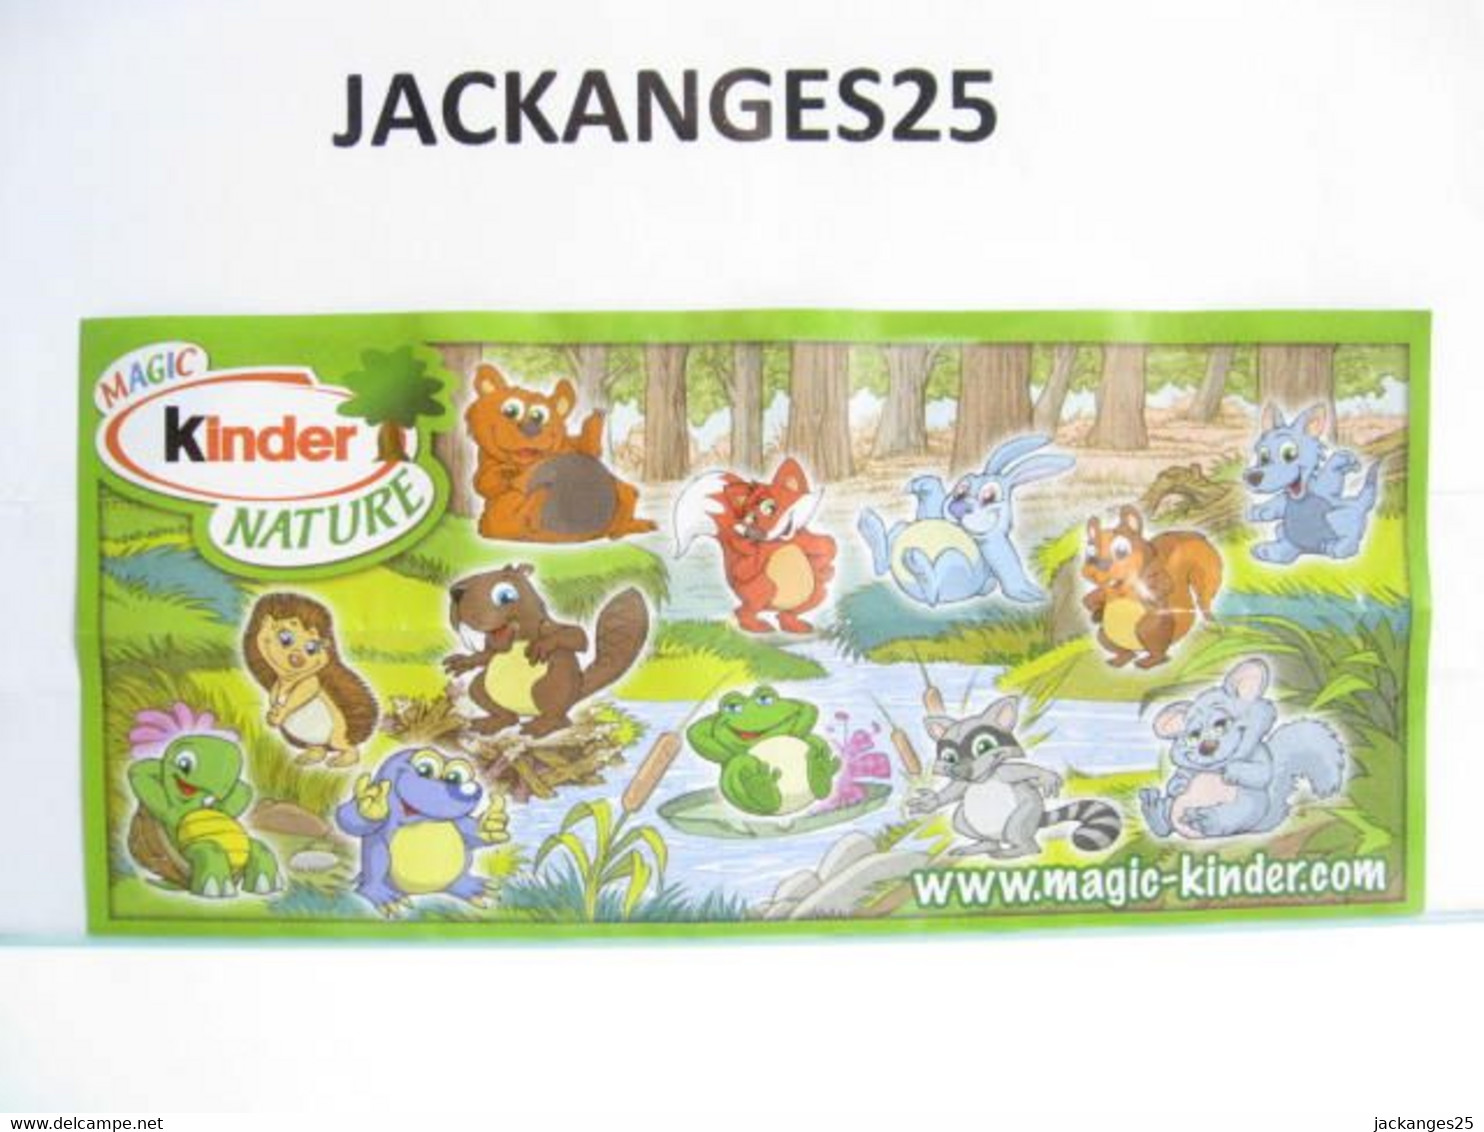 KINDER MPG UN 13 A GRENOUILLE ANIMAUX NATURE NATOONS TIERE 2010  2011 + BPZ A NATURE - Families